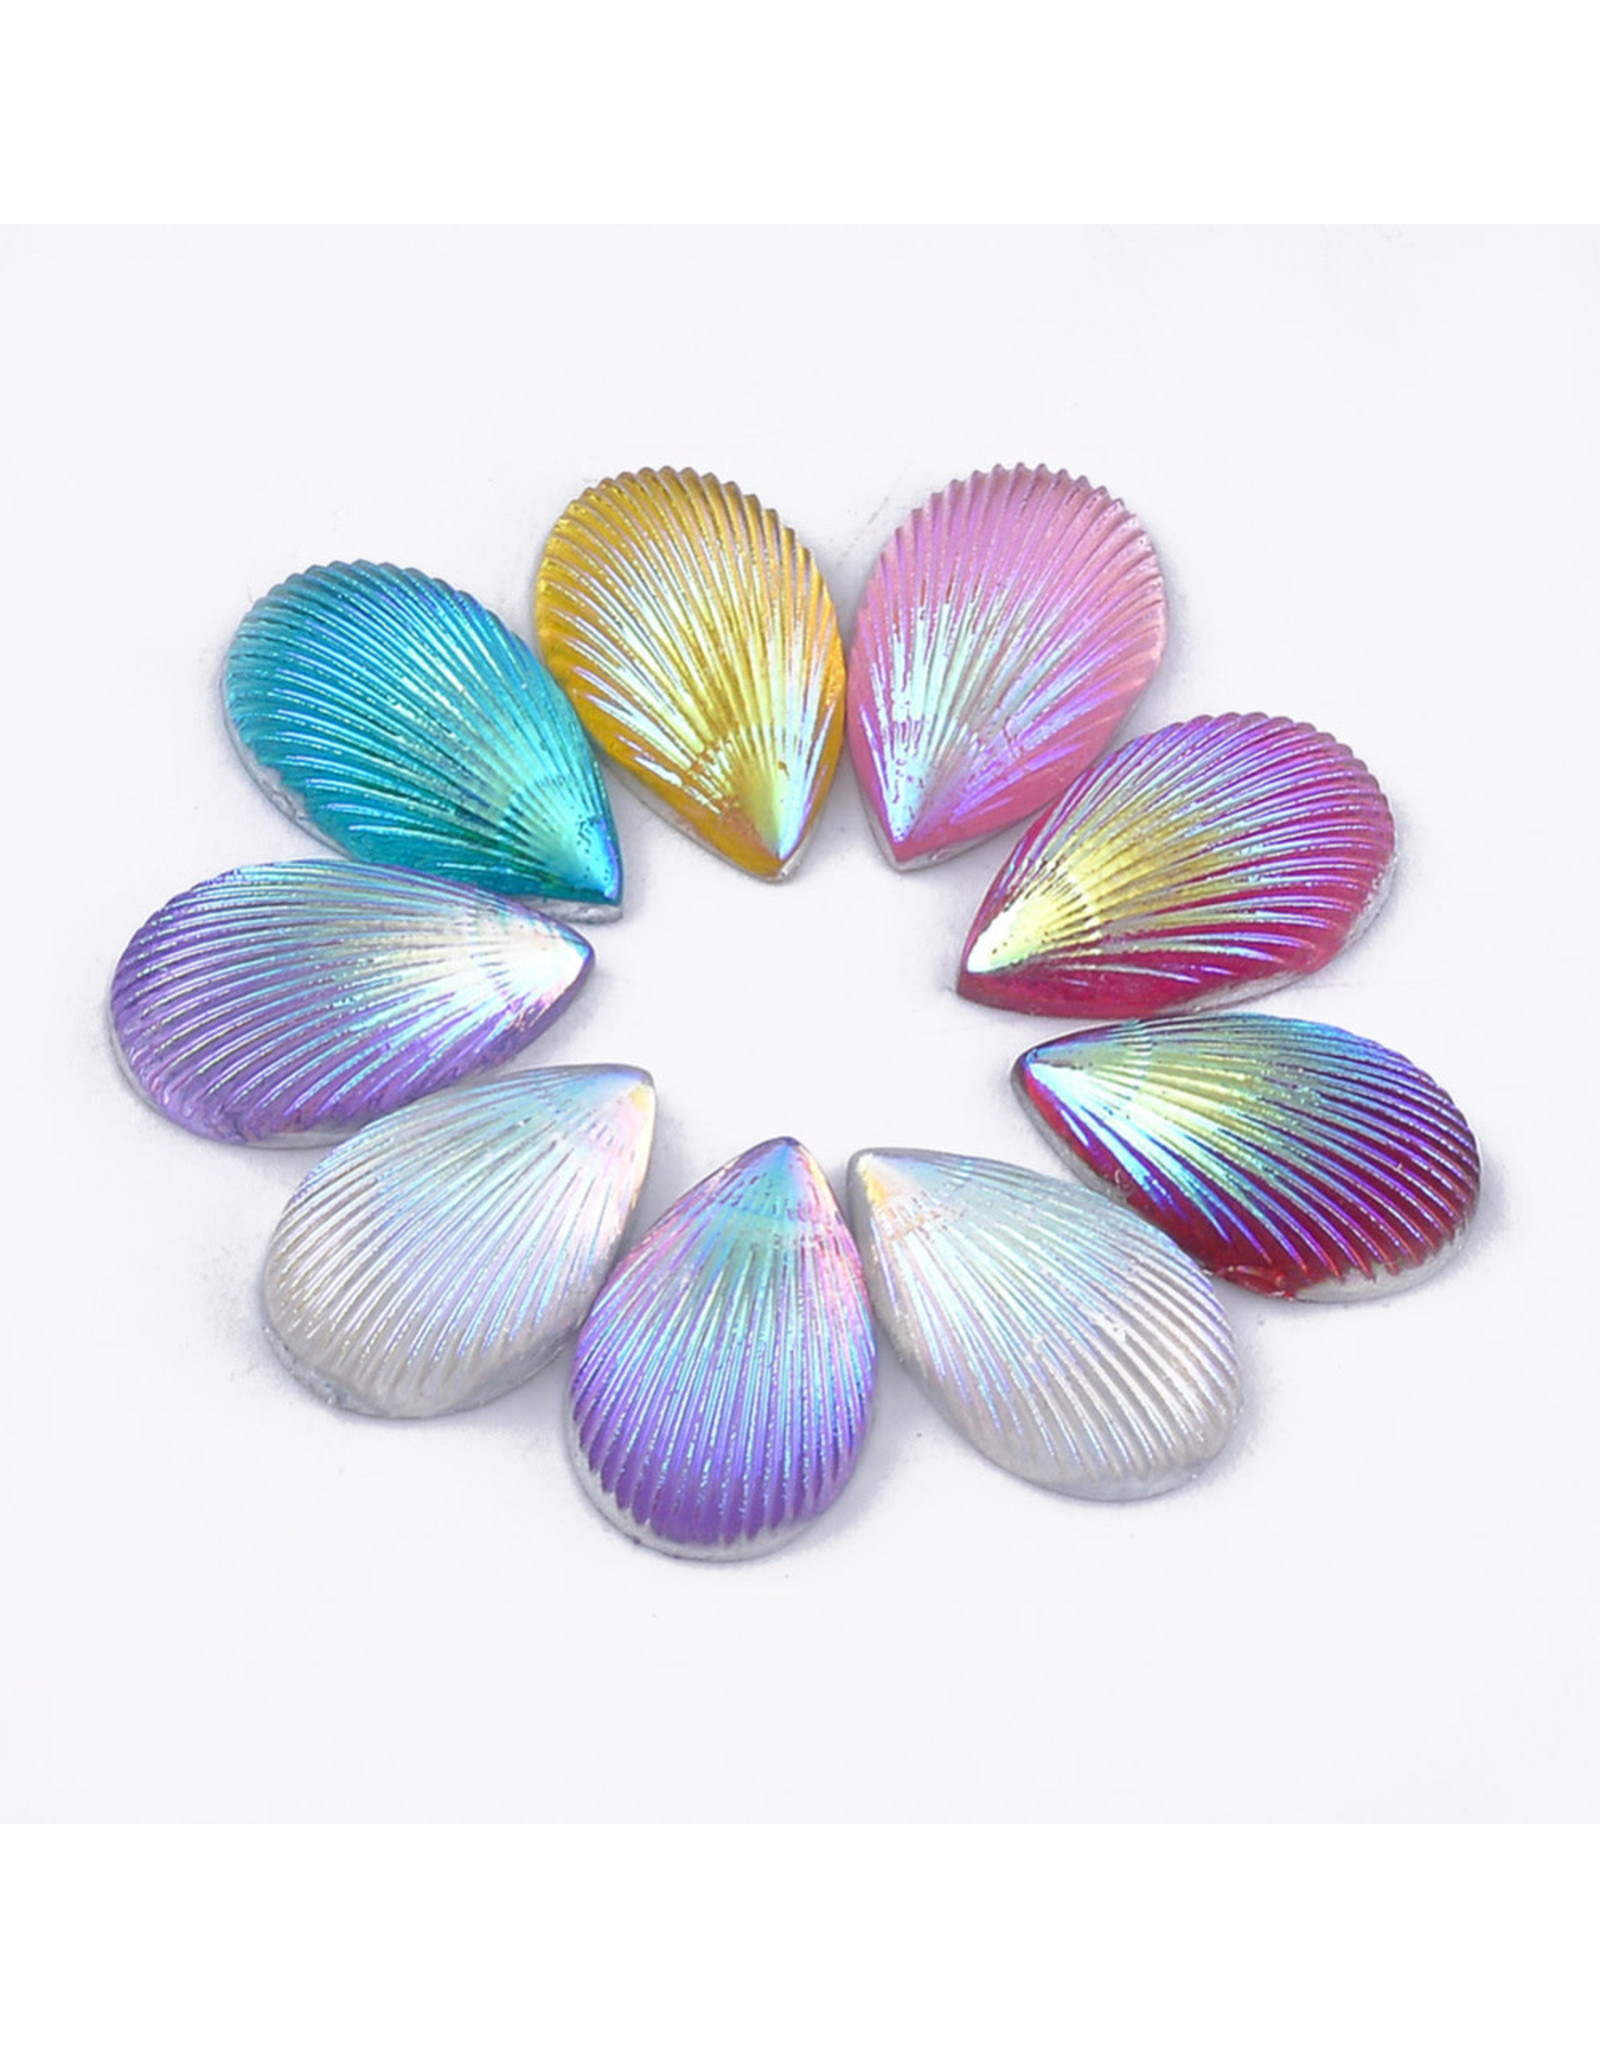 Shell Drop  Resin Cabochon 13x8mm Assorted Pairs  x10pcs